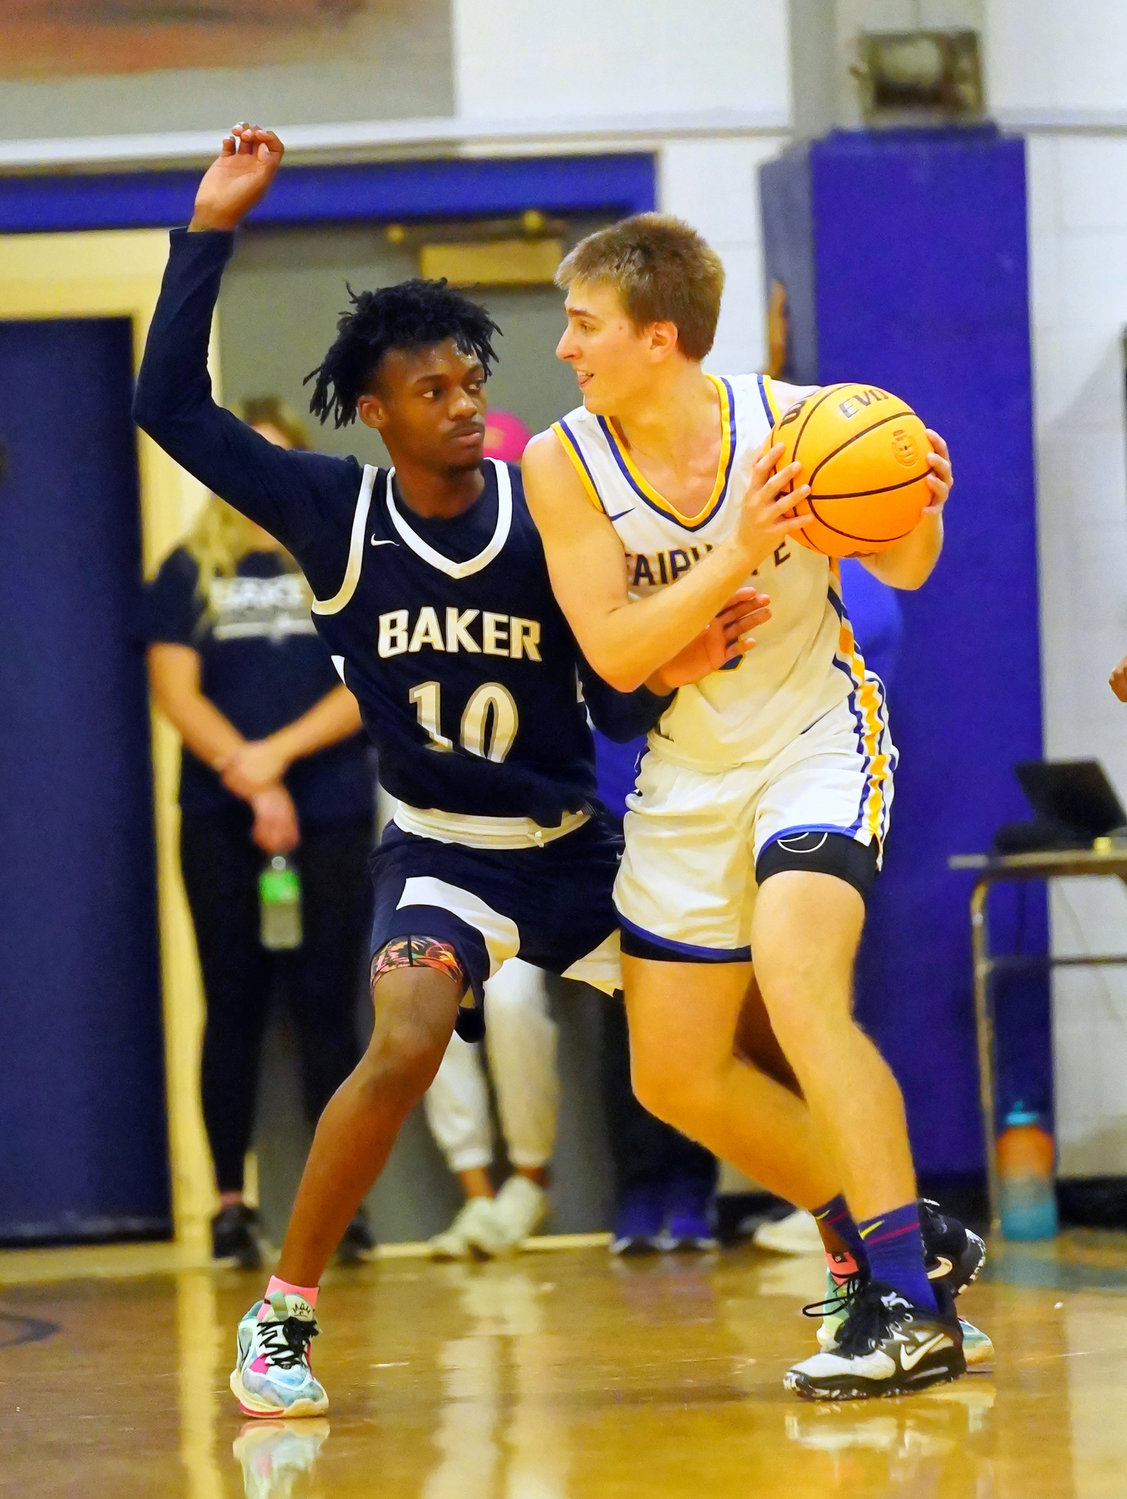 Fairhope junior Zeb Gafford looks for a passing lane during the Pirates’ non-area home game against the Baker Hornets Dec. 13, 2022. In the newest coaches’ poll from the Alabama Association of Basketball Coaches, Fairhope was ranked No. 8 in Class 7A entering play Tuesday.